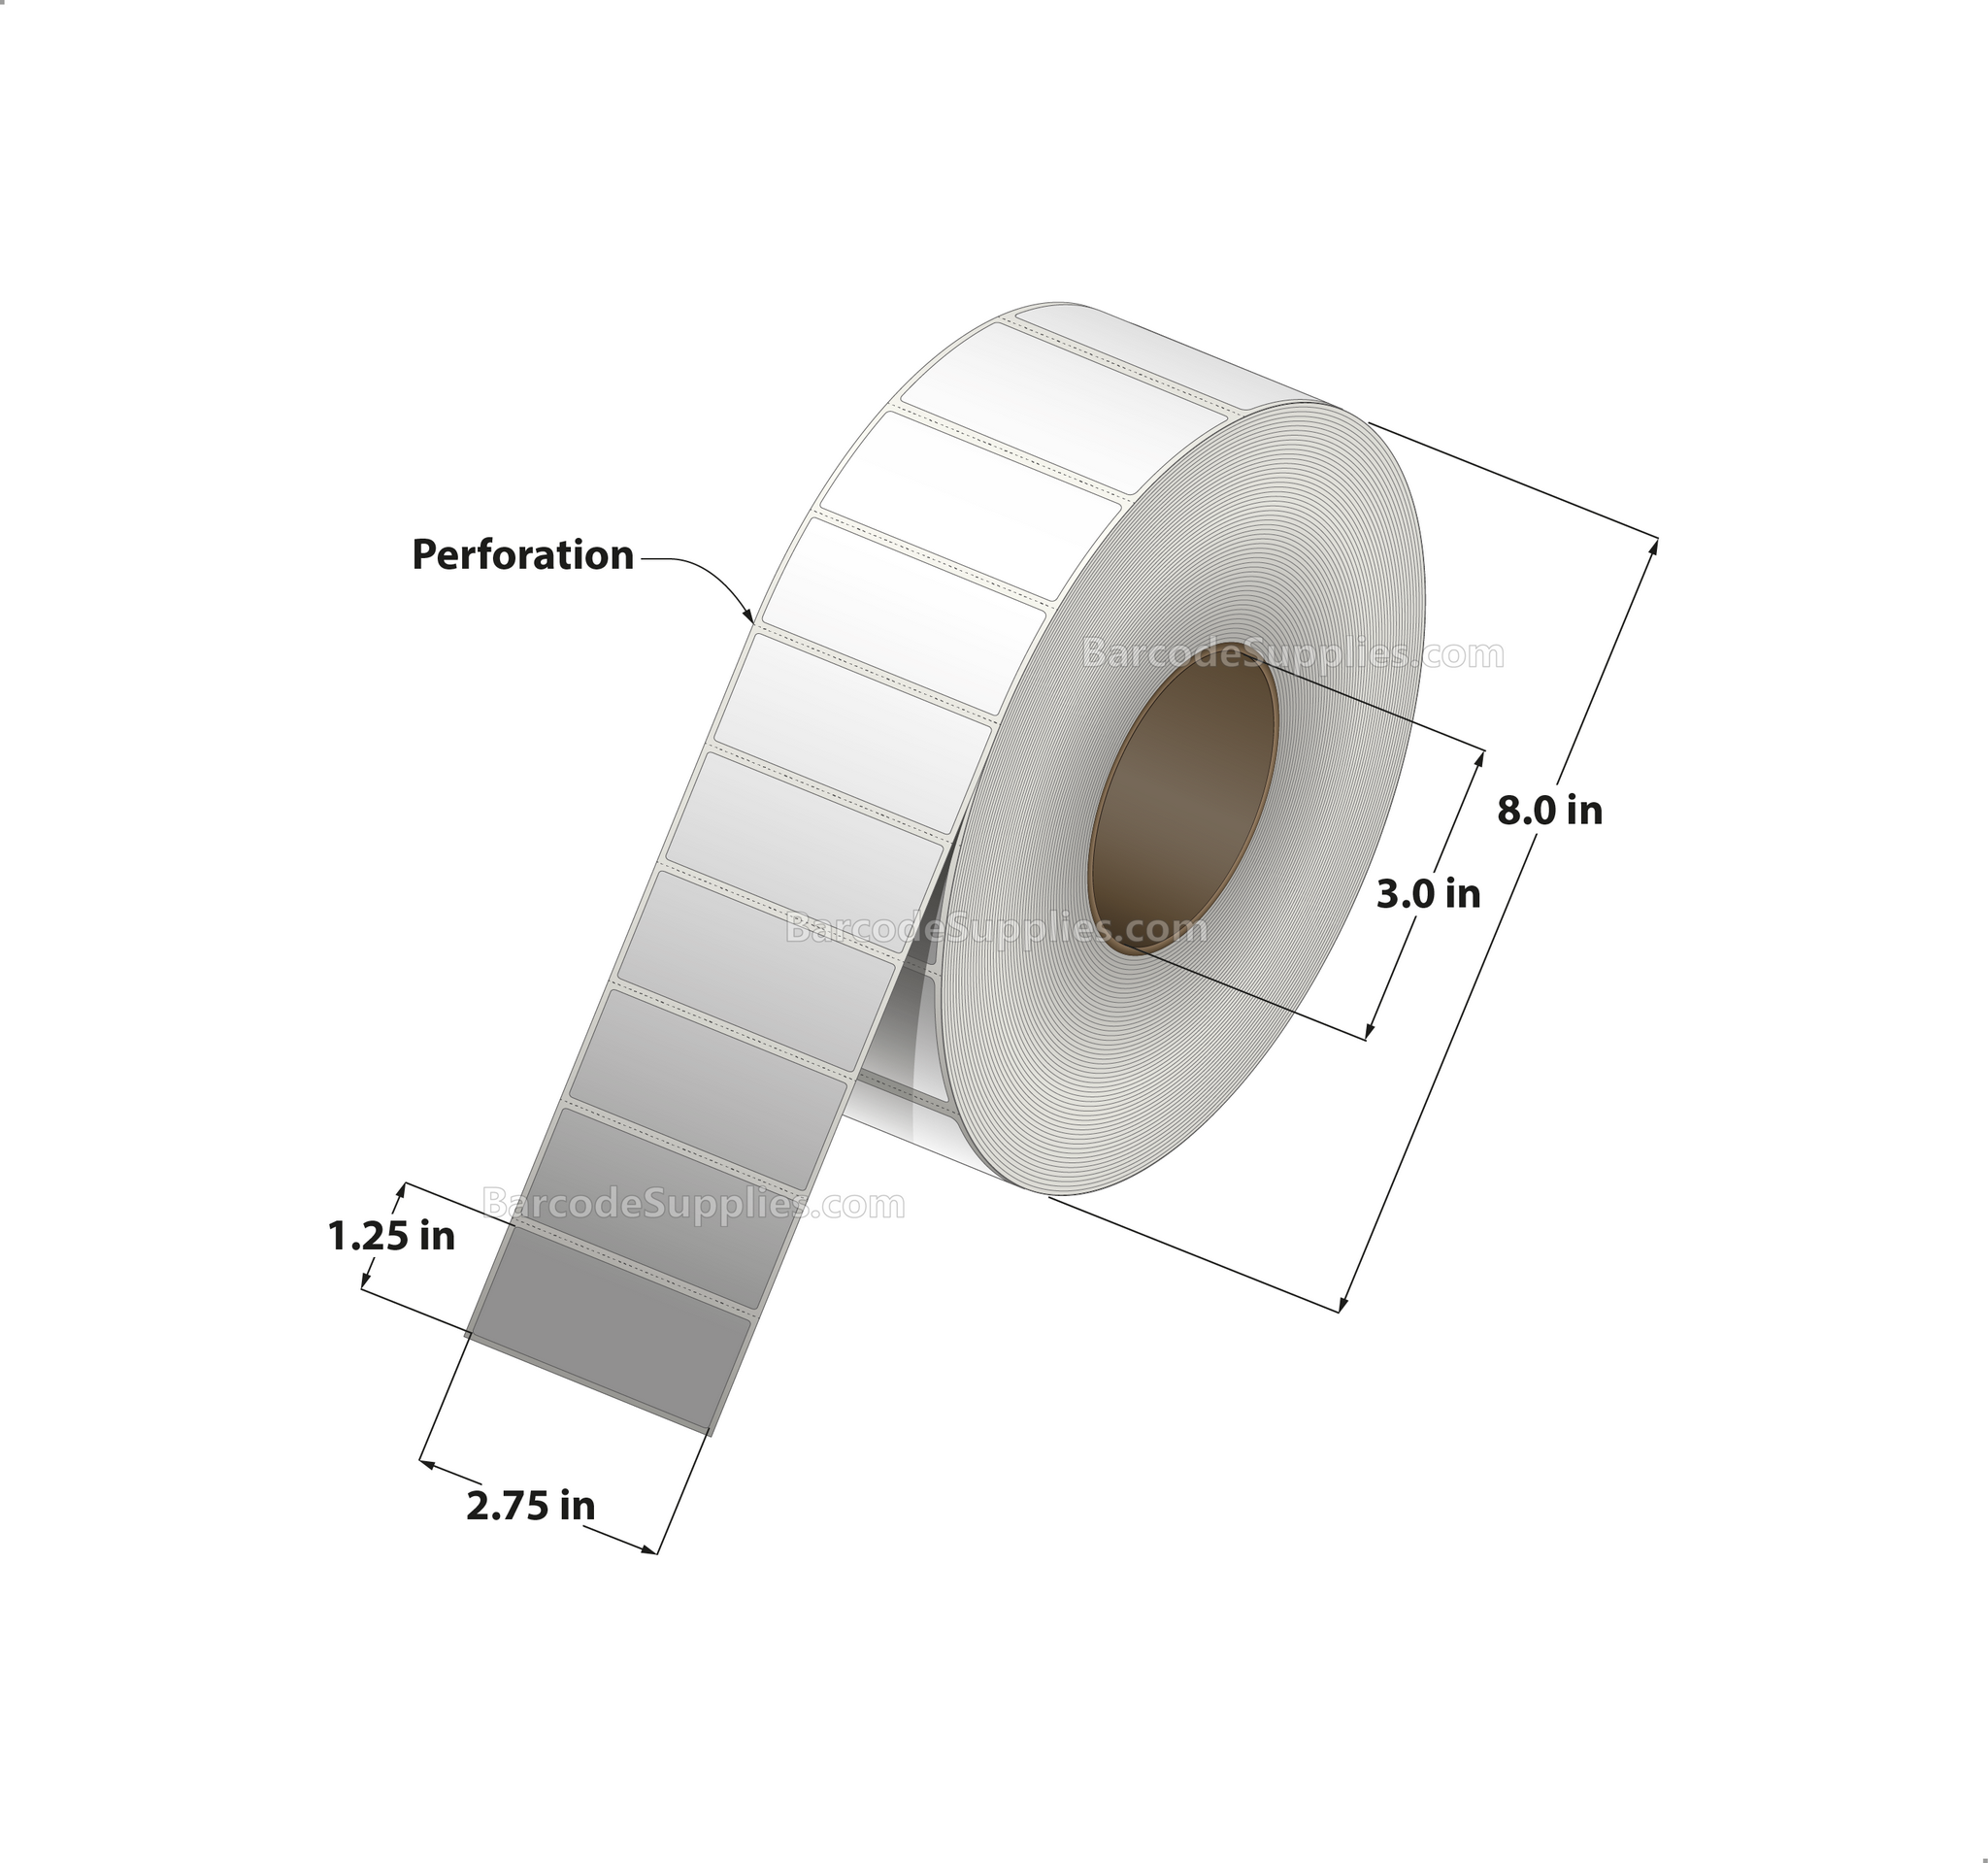 2.75 x 1.25 Thermal Transfer White Labels With Permanent Adhesive - Perforated - 4450 Labels Per Roll - Carton Of 8 Rolls - 35600 Labels Total - MPN: RT-275-125-4450-3